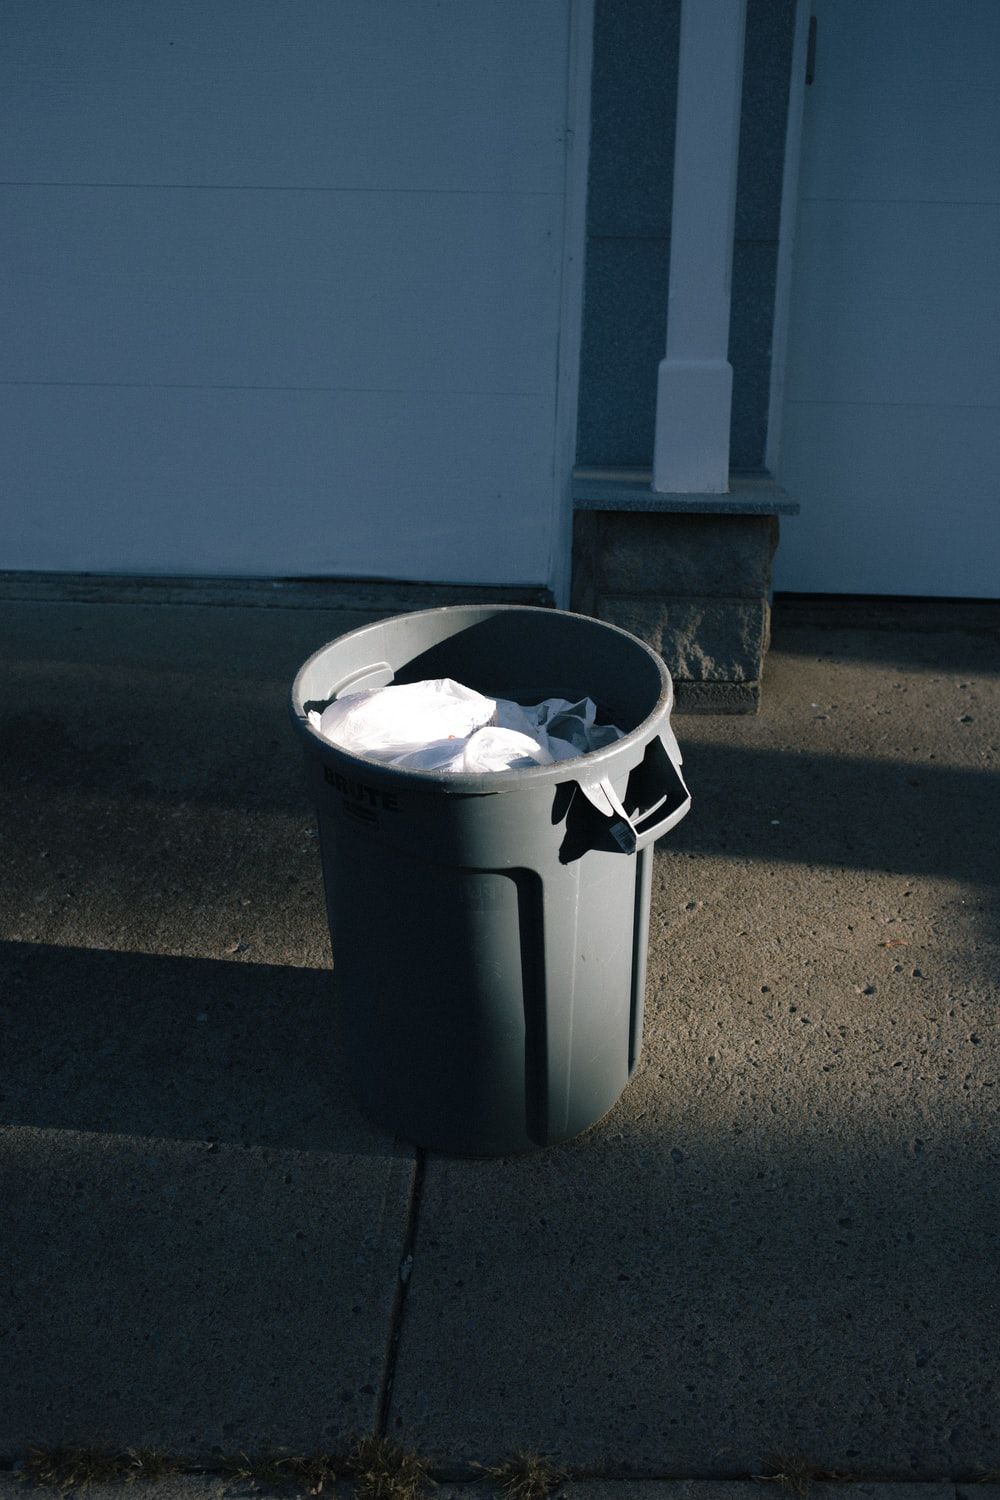 Recycle Bin Picture. Download Free Image